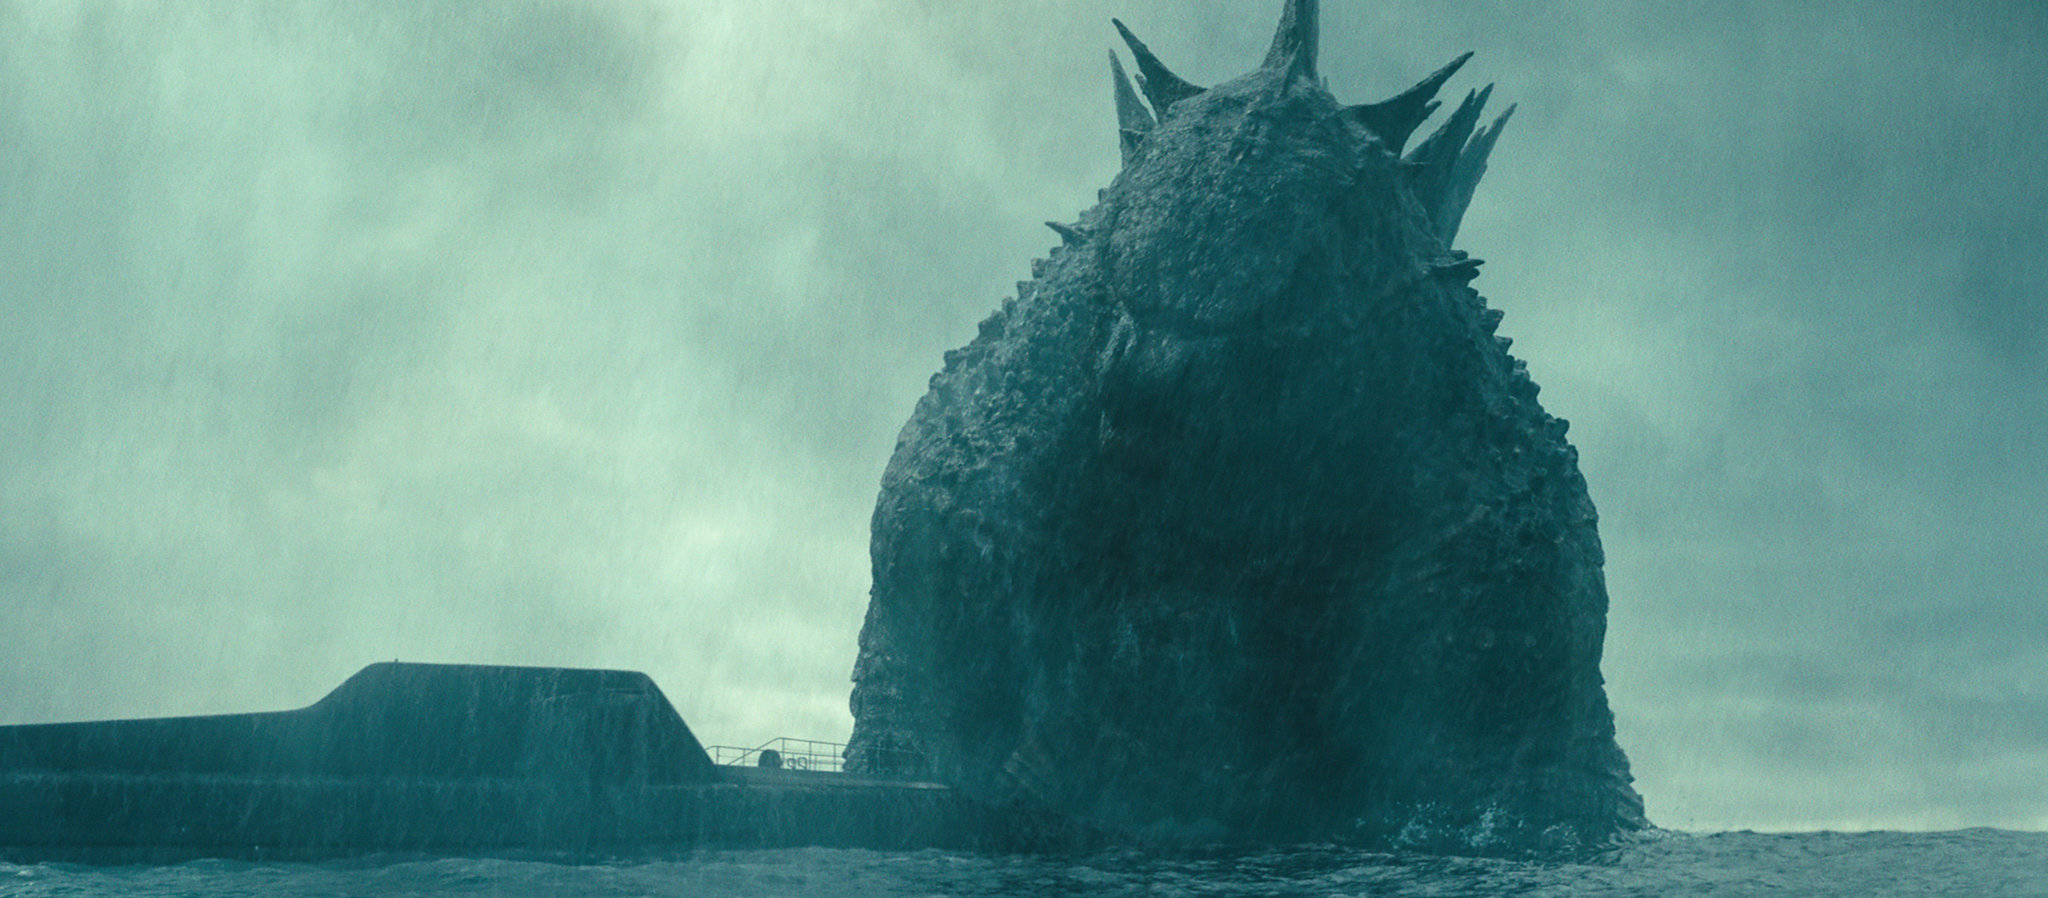 Godzilla, the King of the Monsters